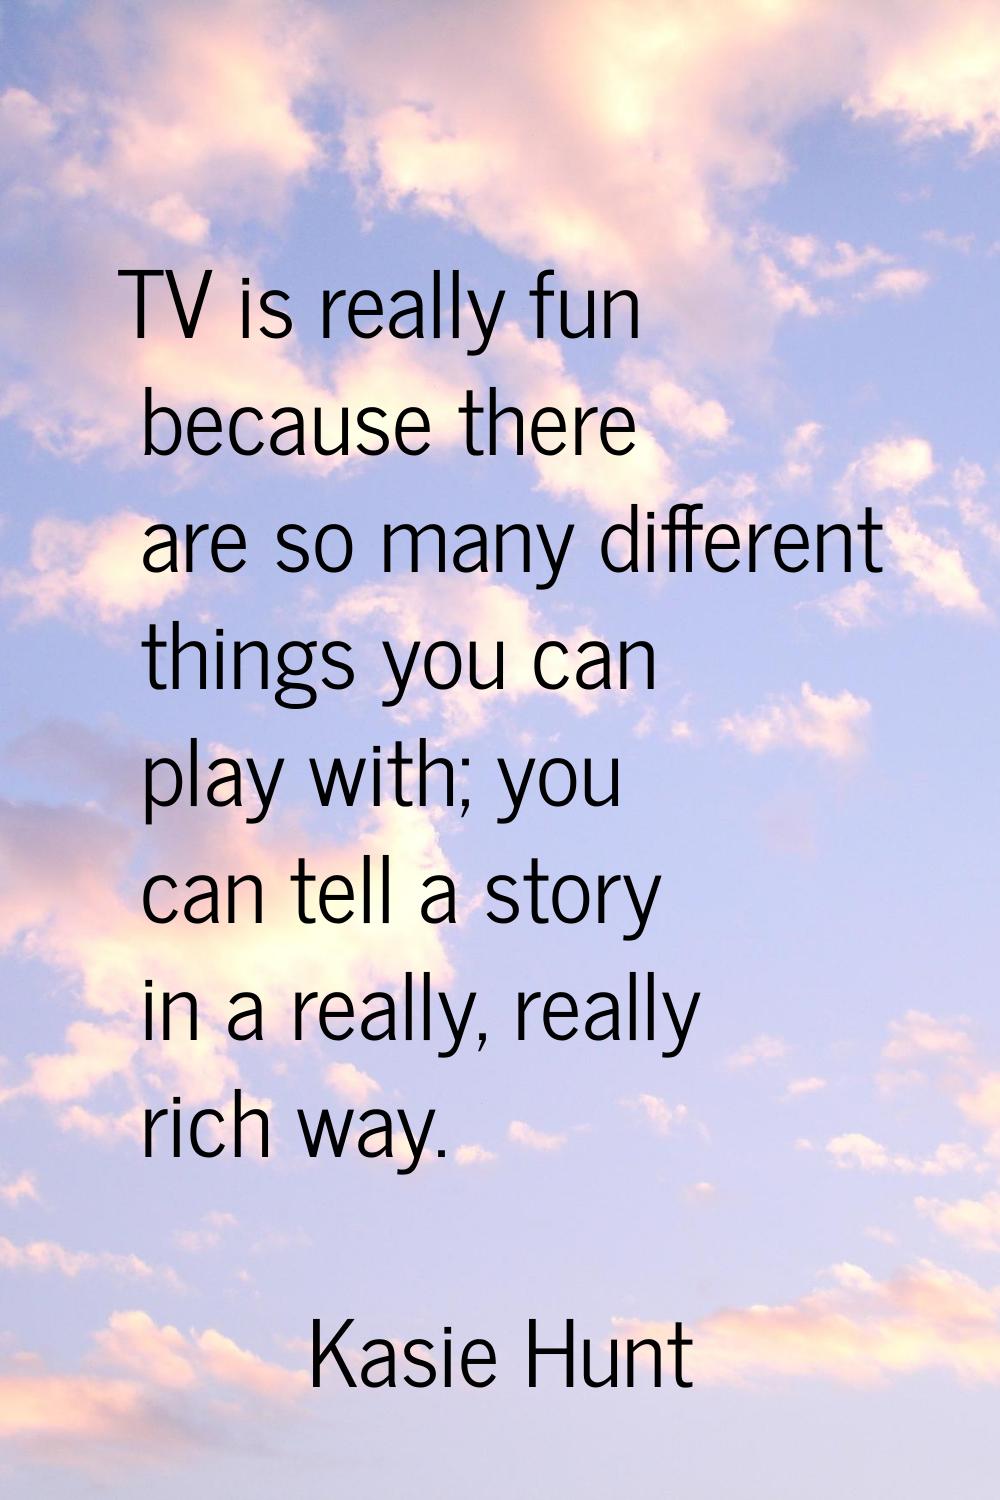 TV is really fun because there are so many different things you can play with; you can tell a story